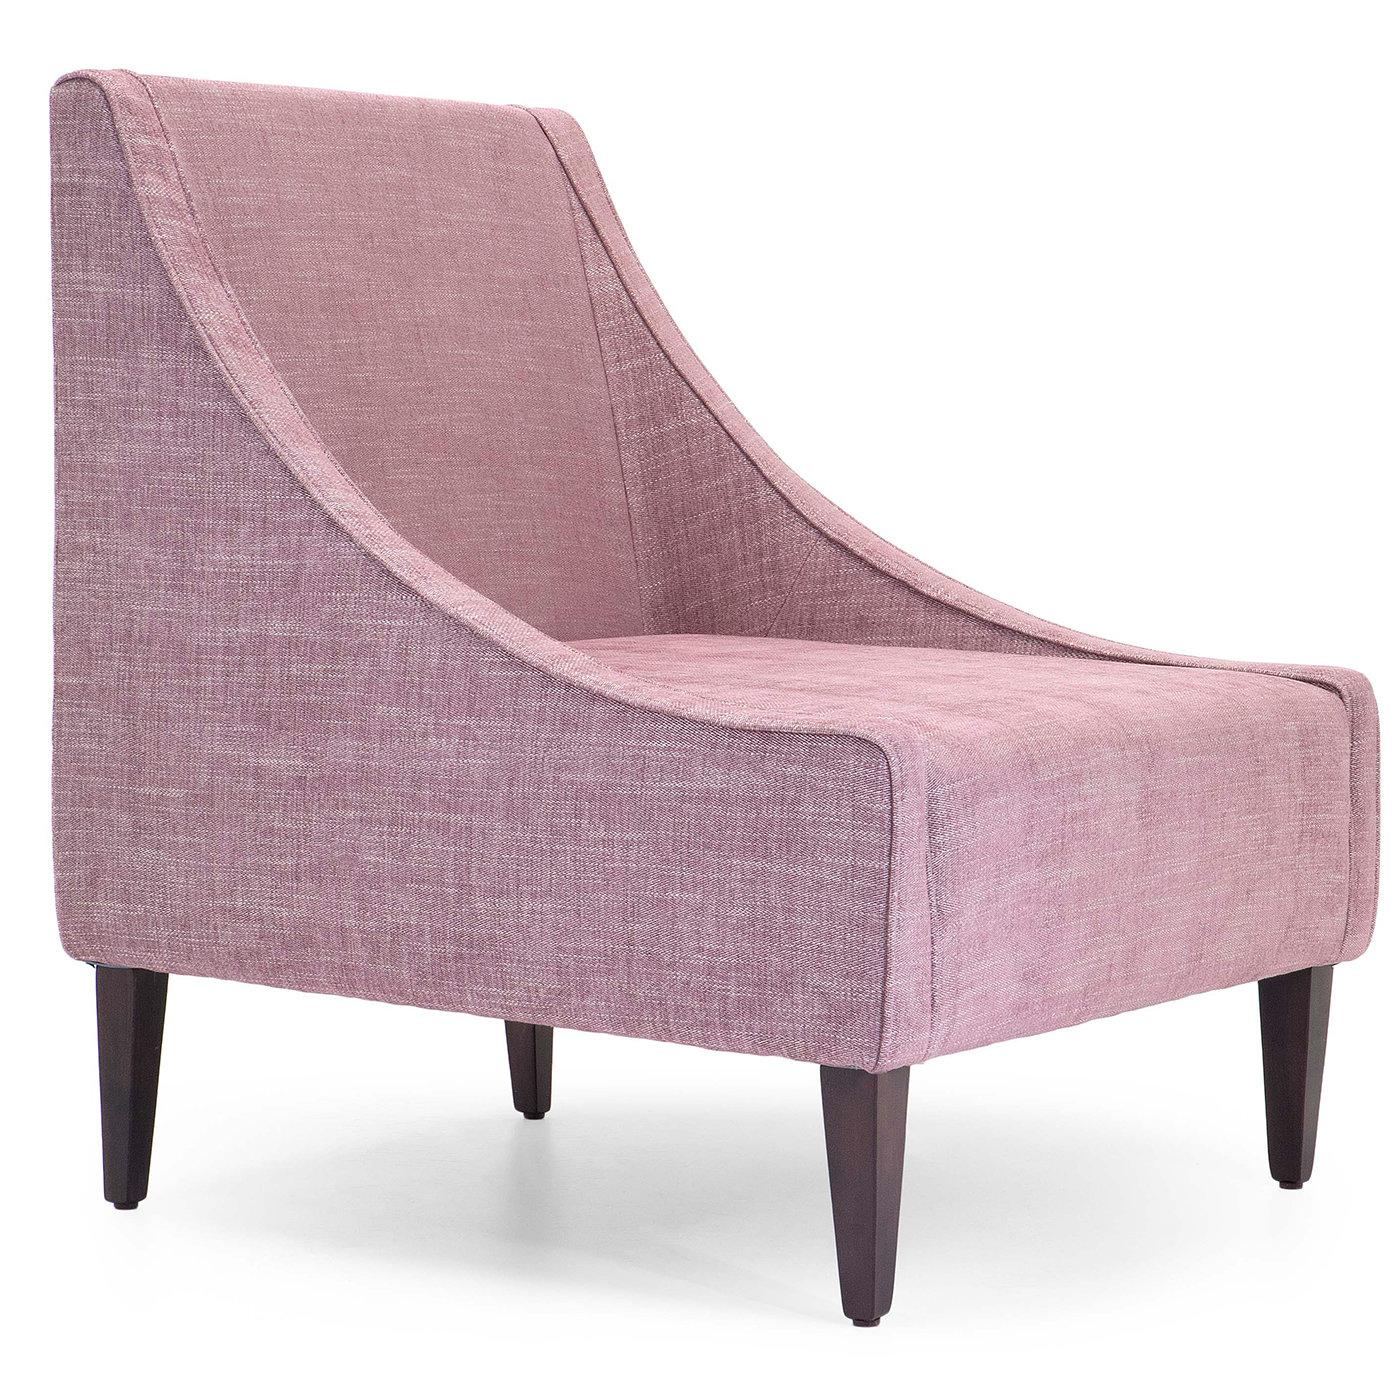 A contemporary classic, this armchair is designed with style and comfort in mind. Featuring a spacious silhouette with sloping armrests connecting back an seat, the multi-density polyurethane padding ensured effortless comfort to the slender plywood